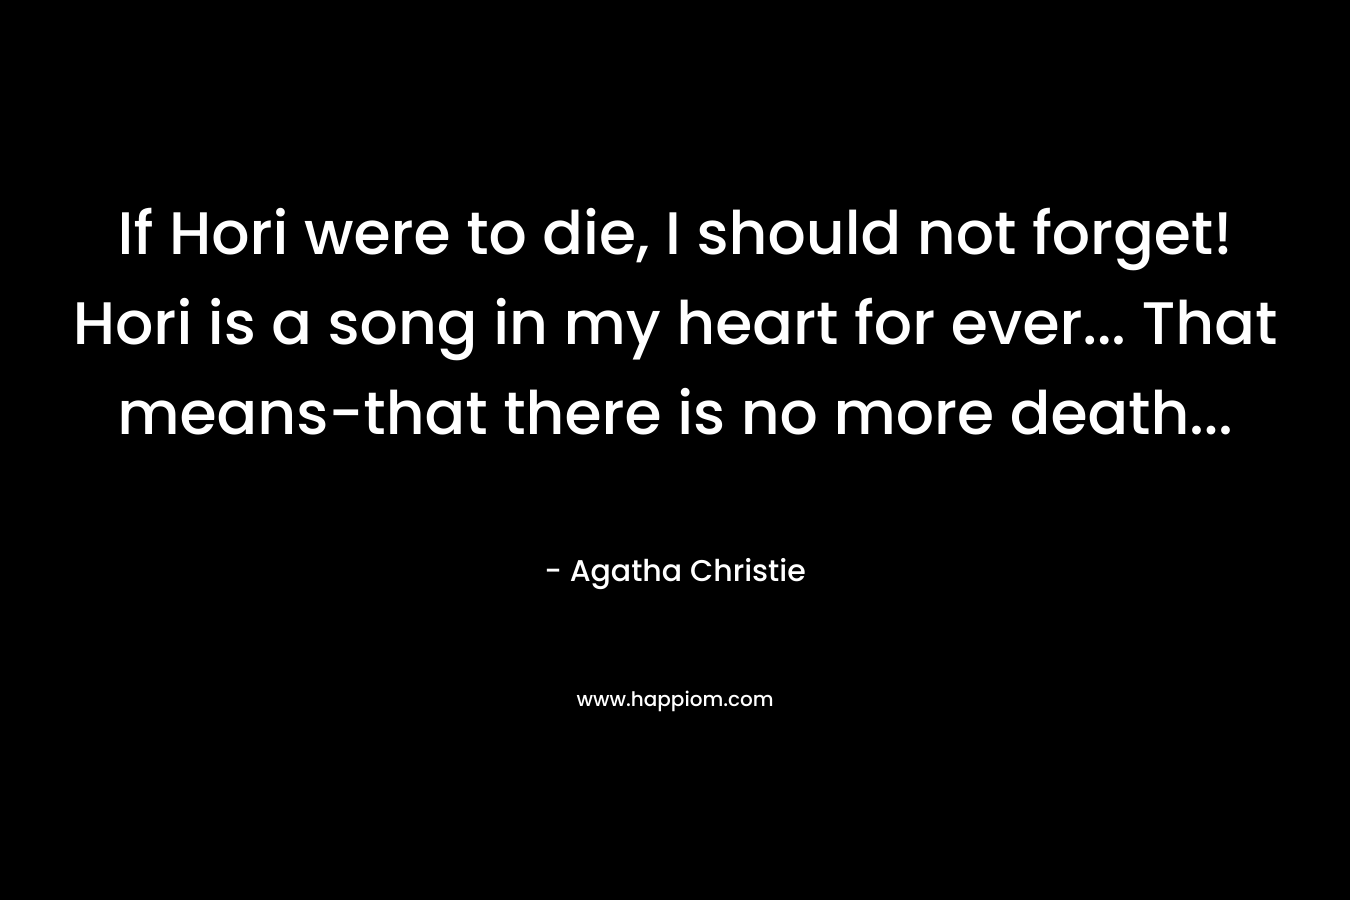 If Hori were to die, I should not forget! Hori is a song in my heart for ever... That means-that there is no more death...